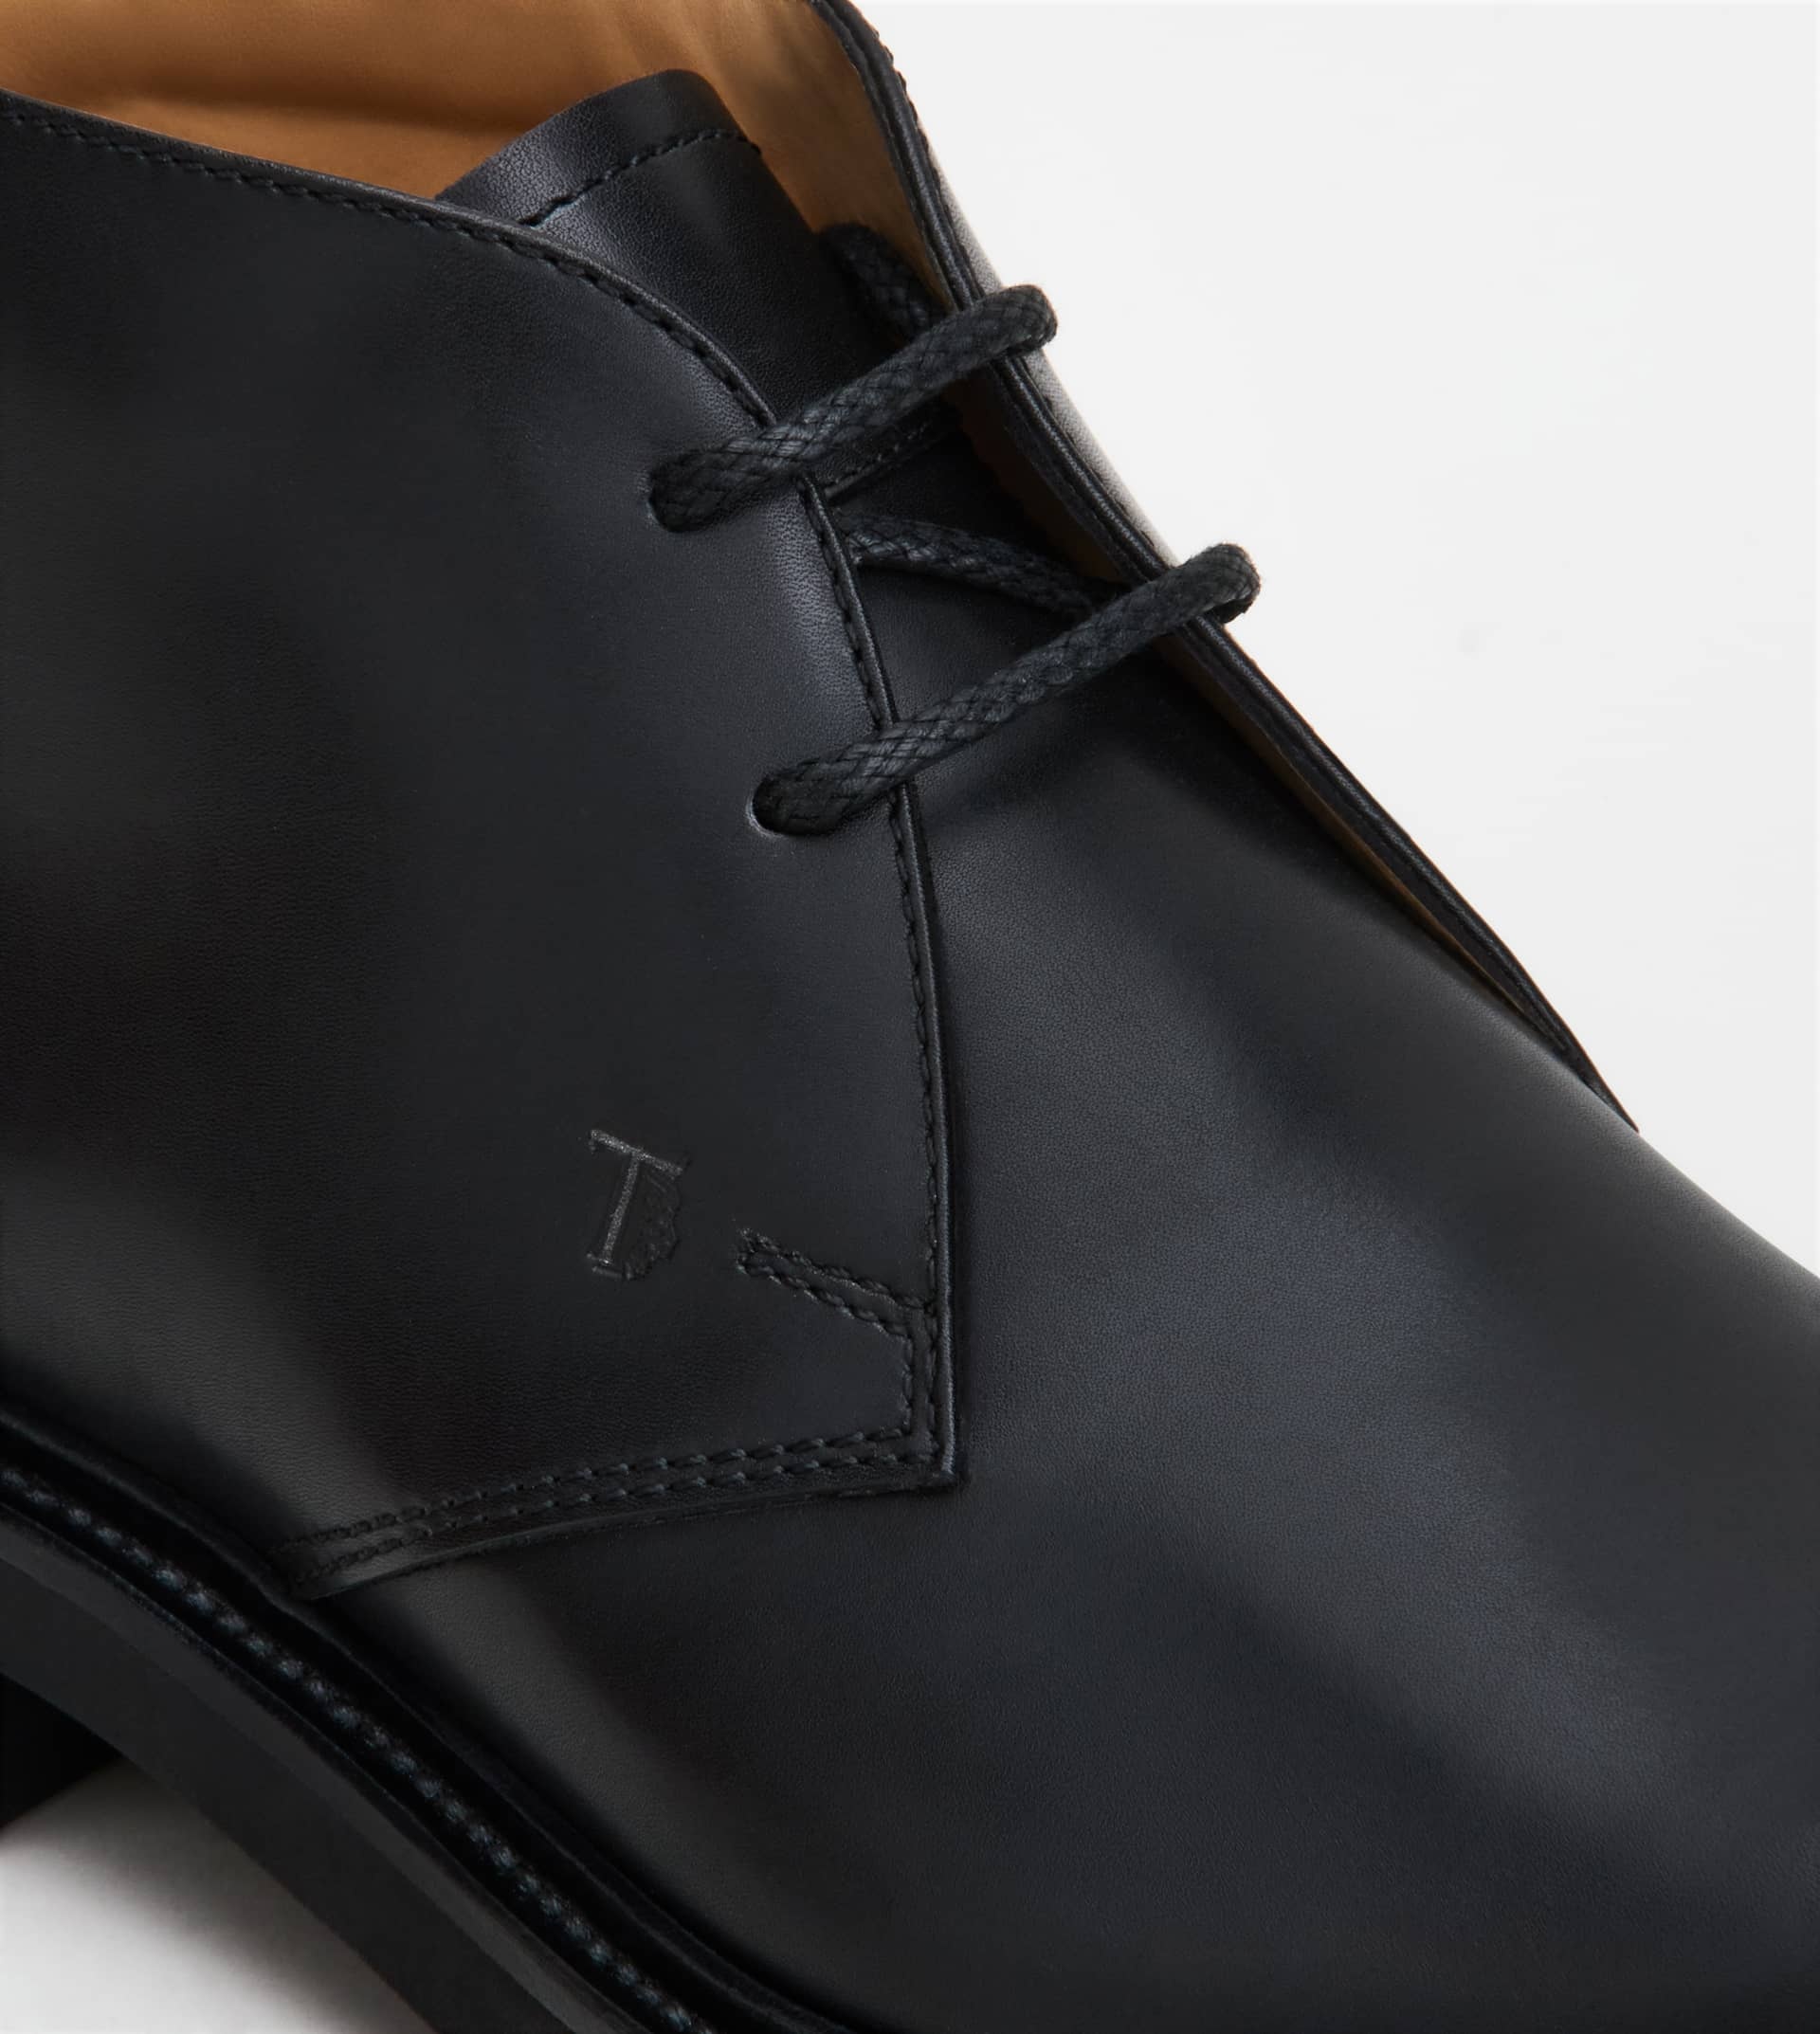 DESERT BOOTS IN LEATHER - BLACK - 6